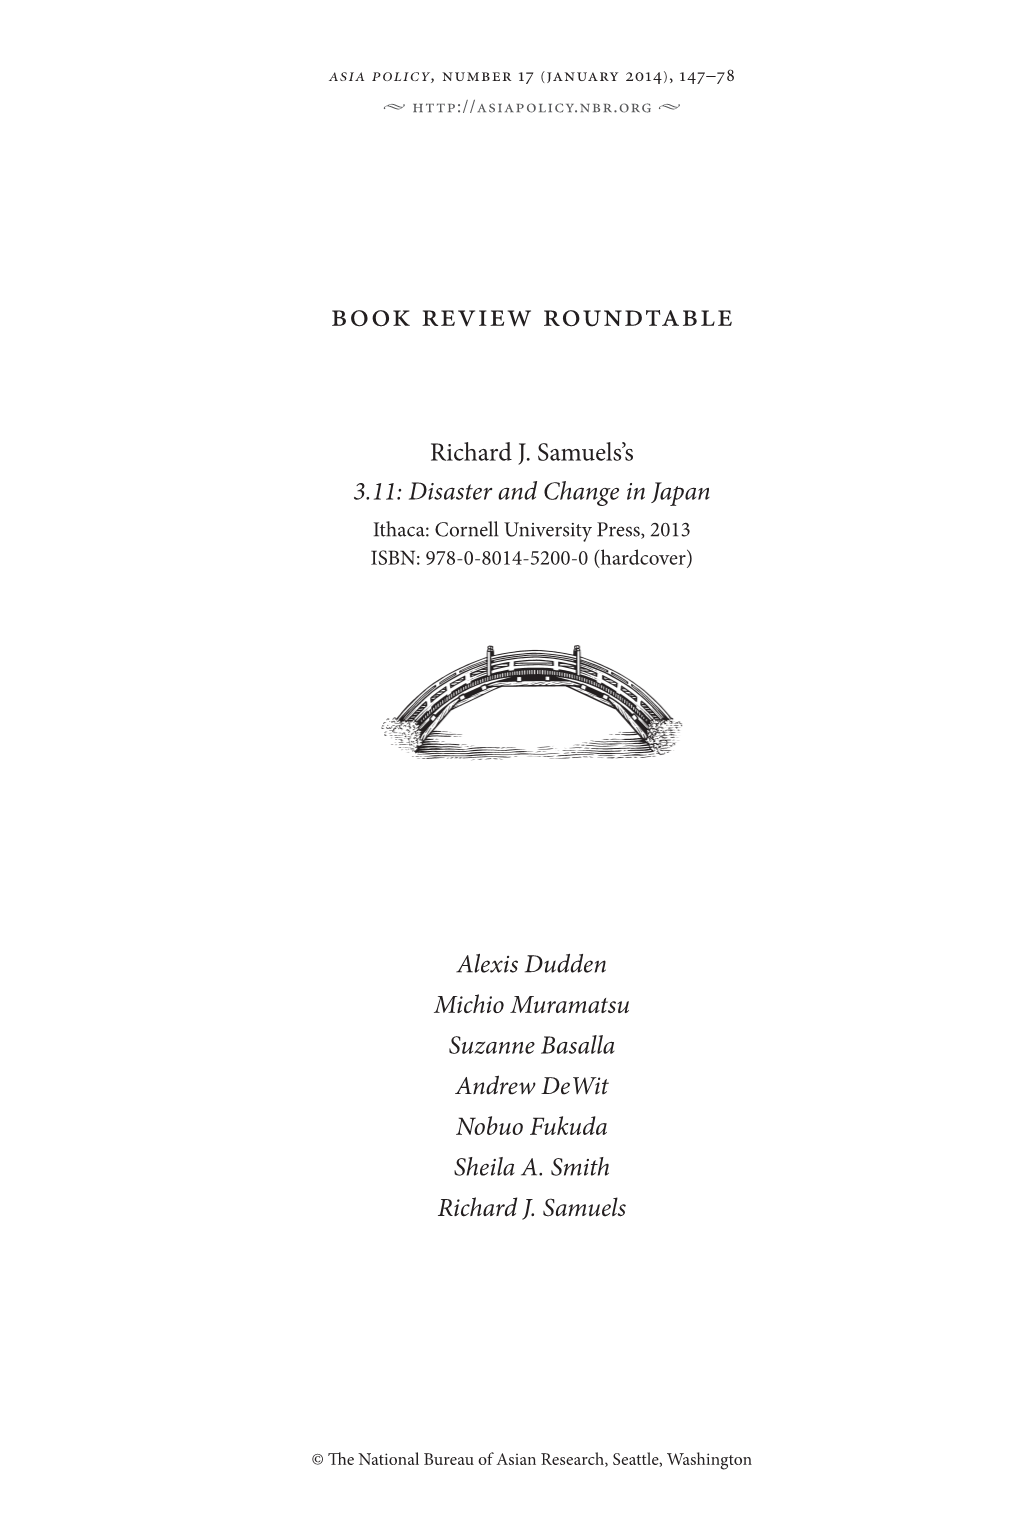 Download the Book Review Roundtable